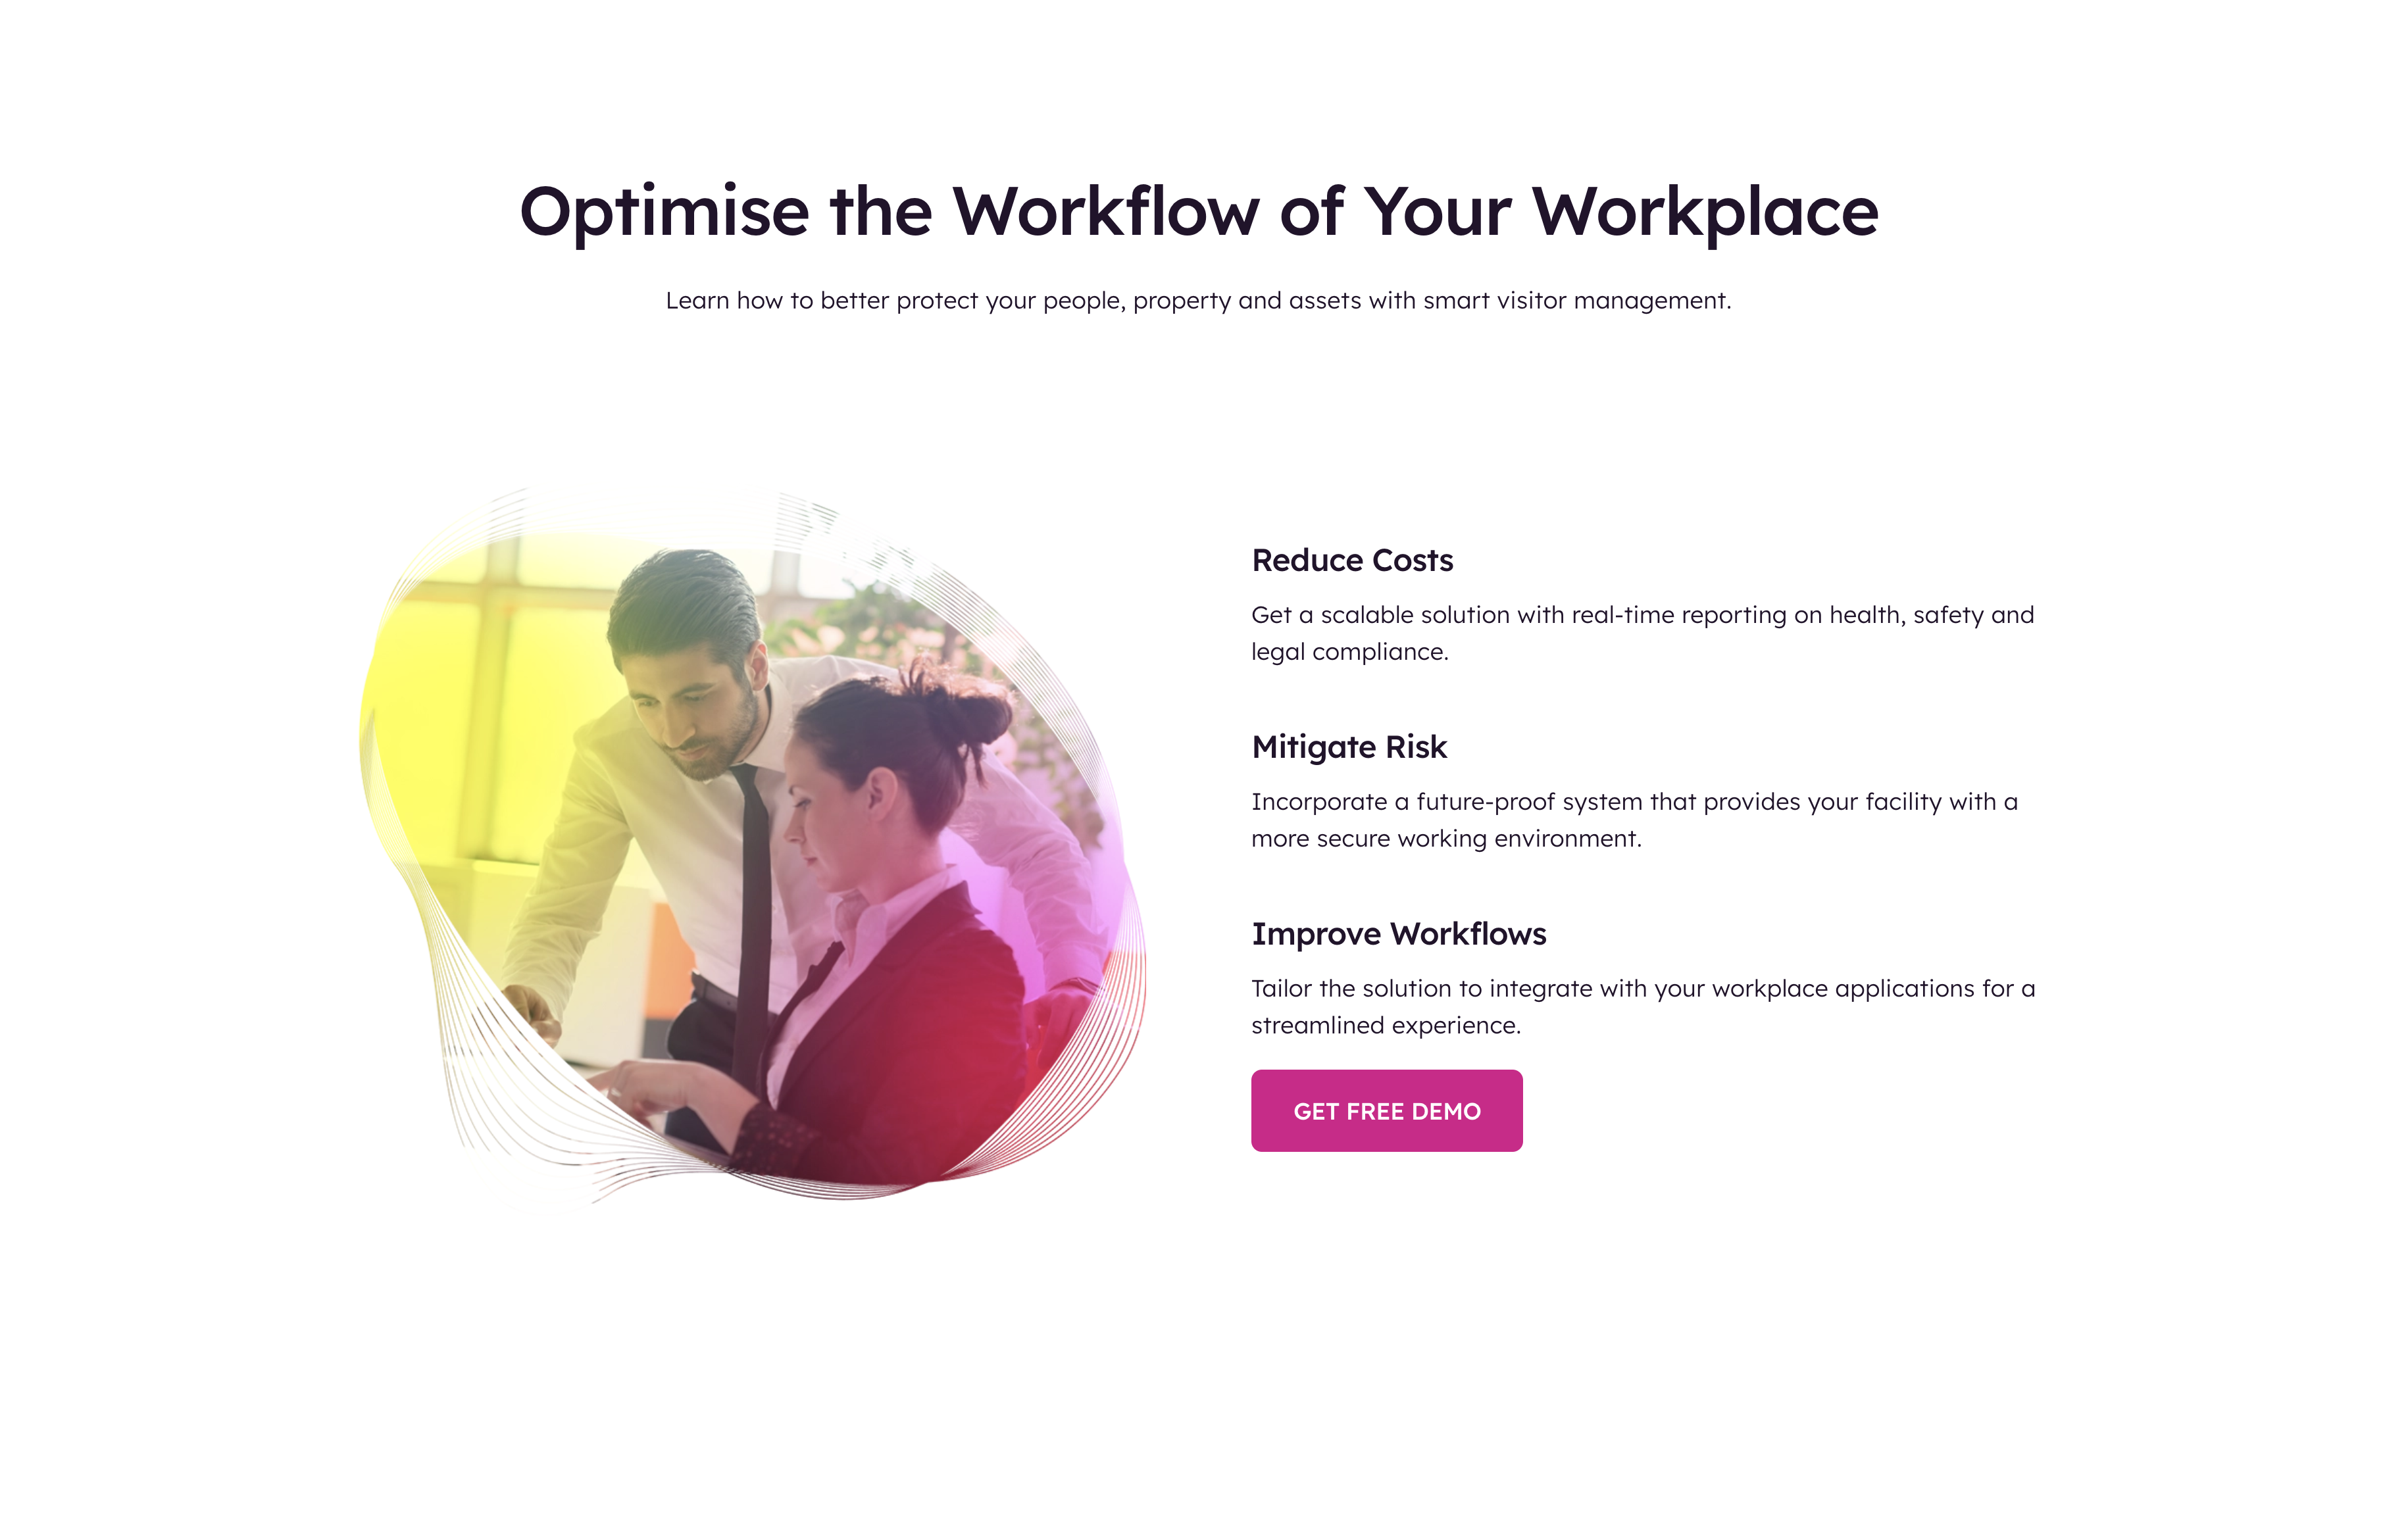 Optimise the Workflow of Your Workplace